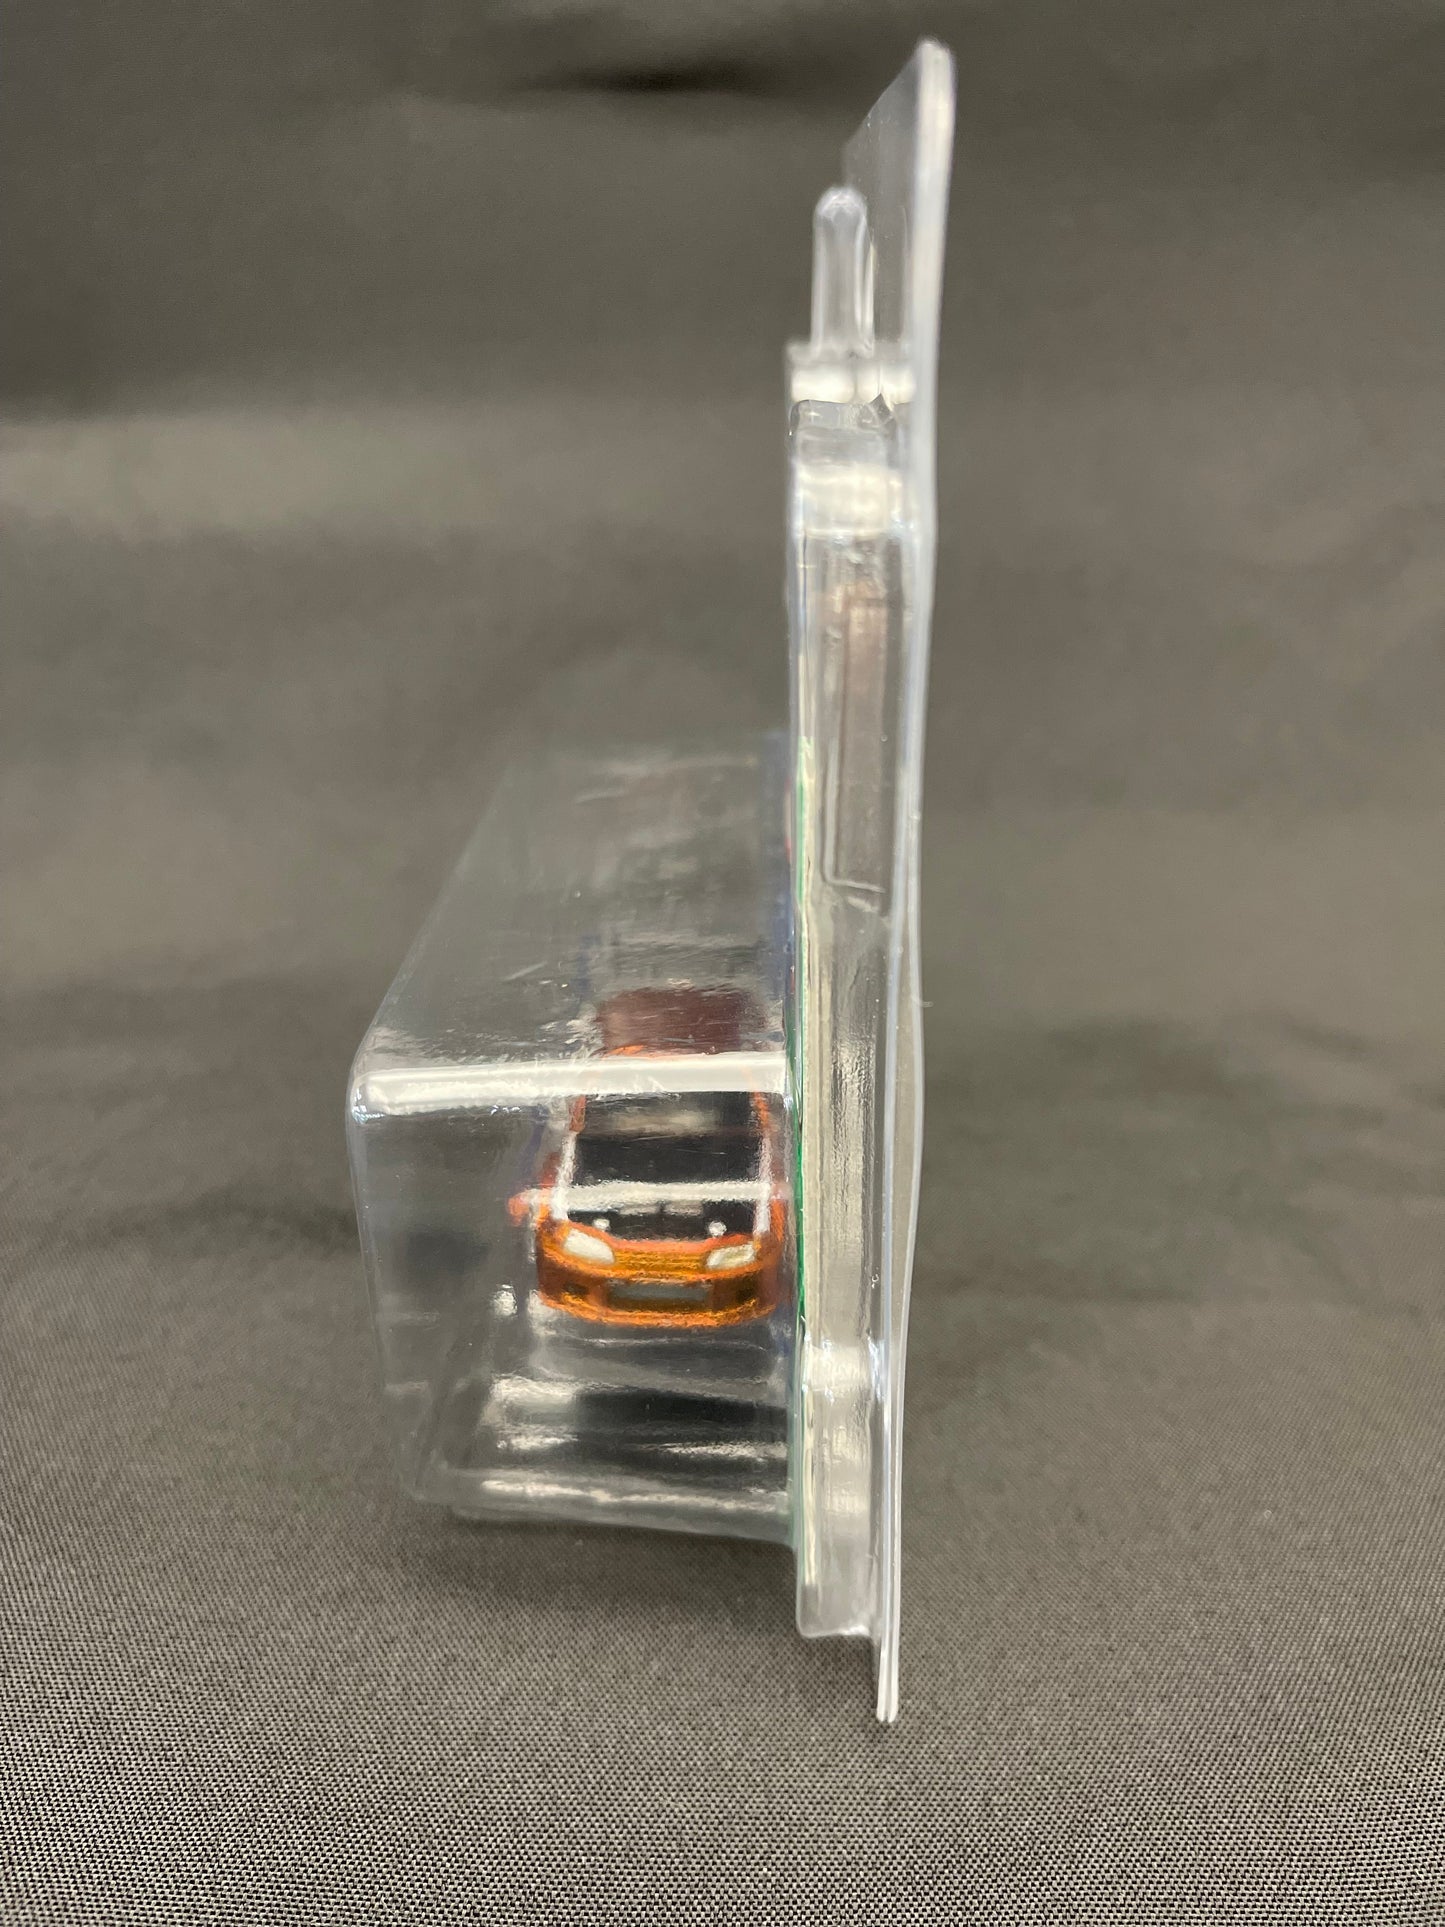 Hot Wheels Short Card Protector - Premium  from Diamond Protector - Shop now at Diamond Protector